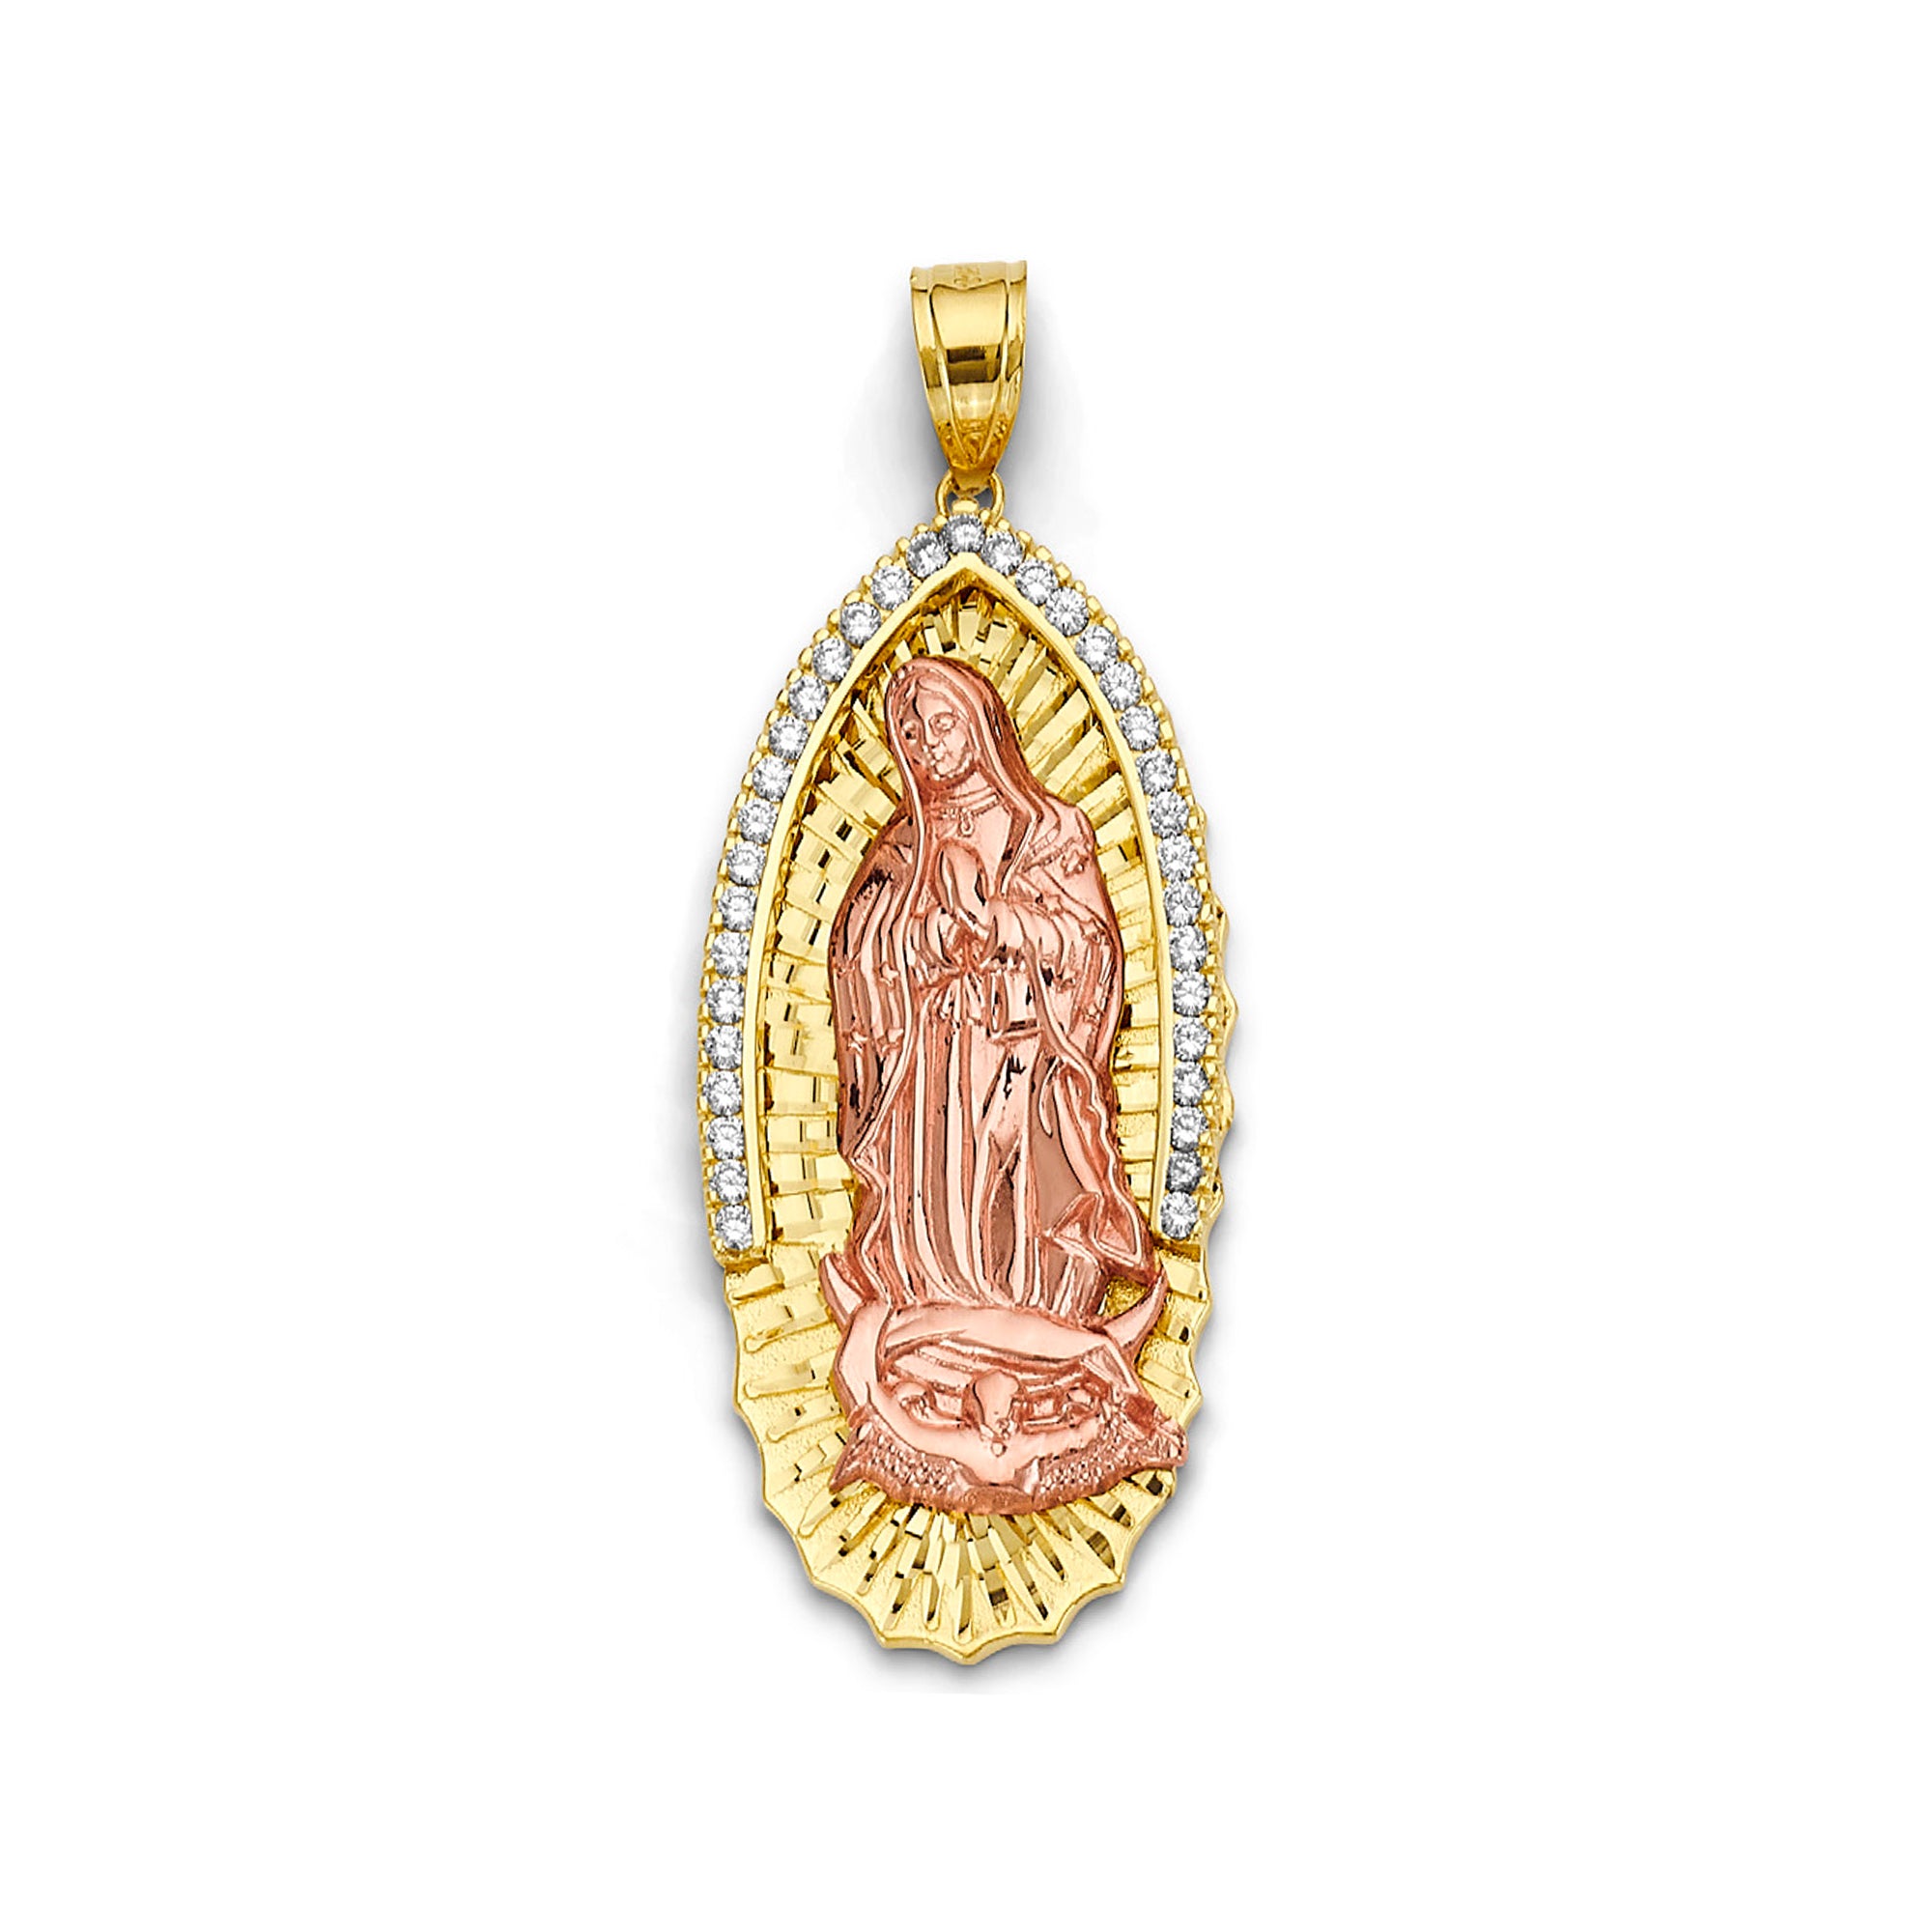 Dual Tone Virgin Mary Pendant Necklace in 14K Yellow Gold (35.0g)